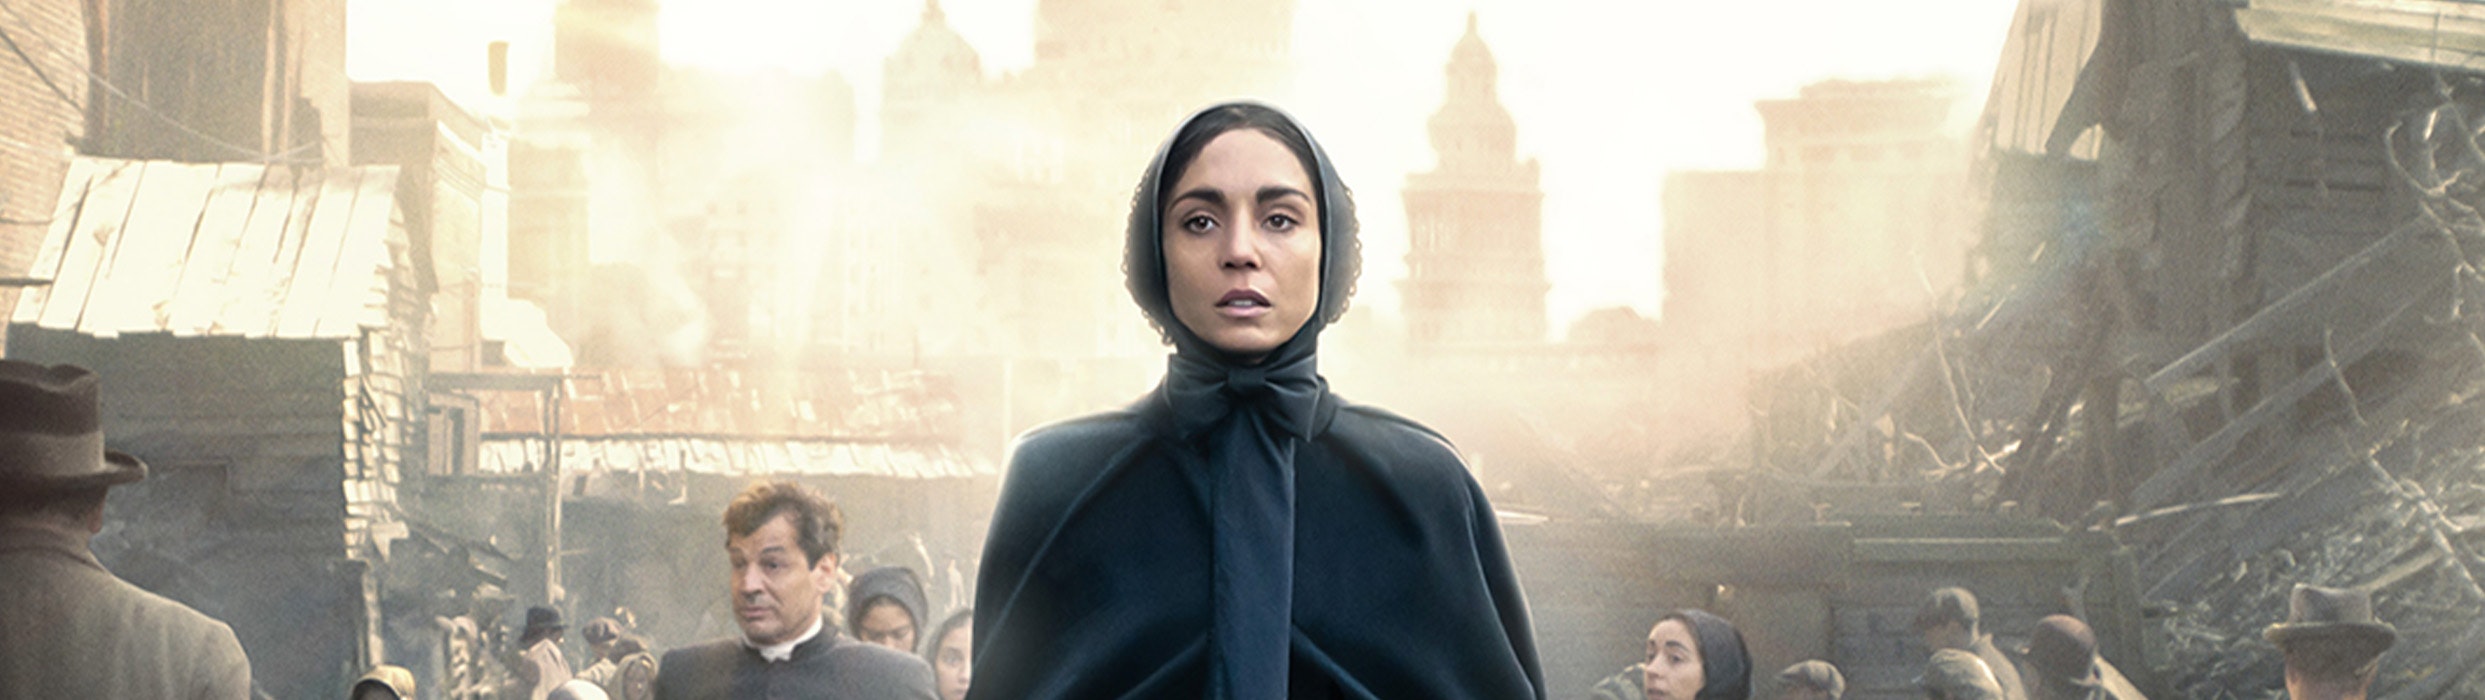 Francesca Cabrini amongst the poor and famished New York City in the 1800s on a mission to save the children. See Cabrini at Harkins March 8.